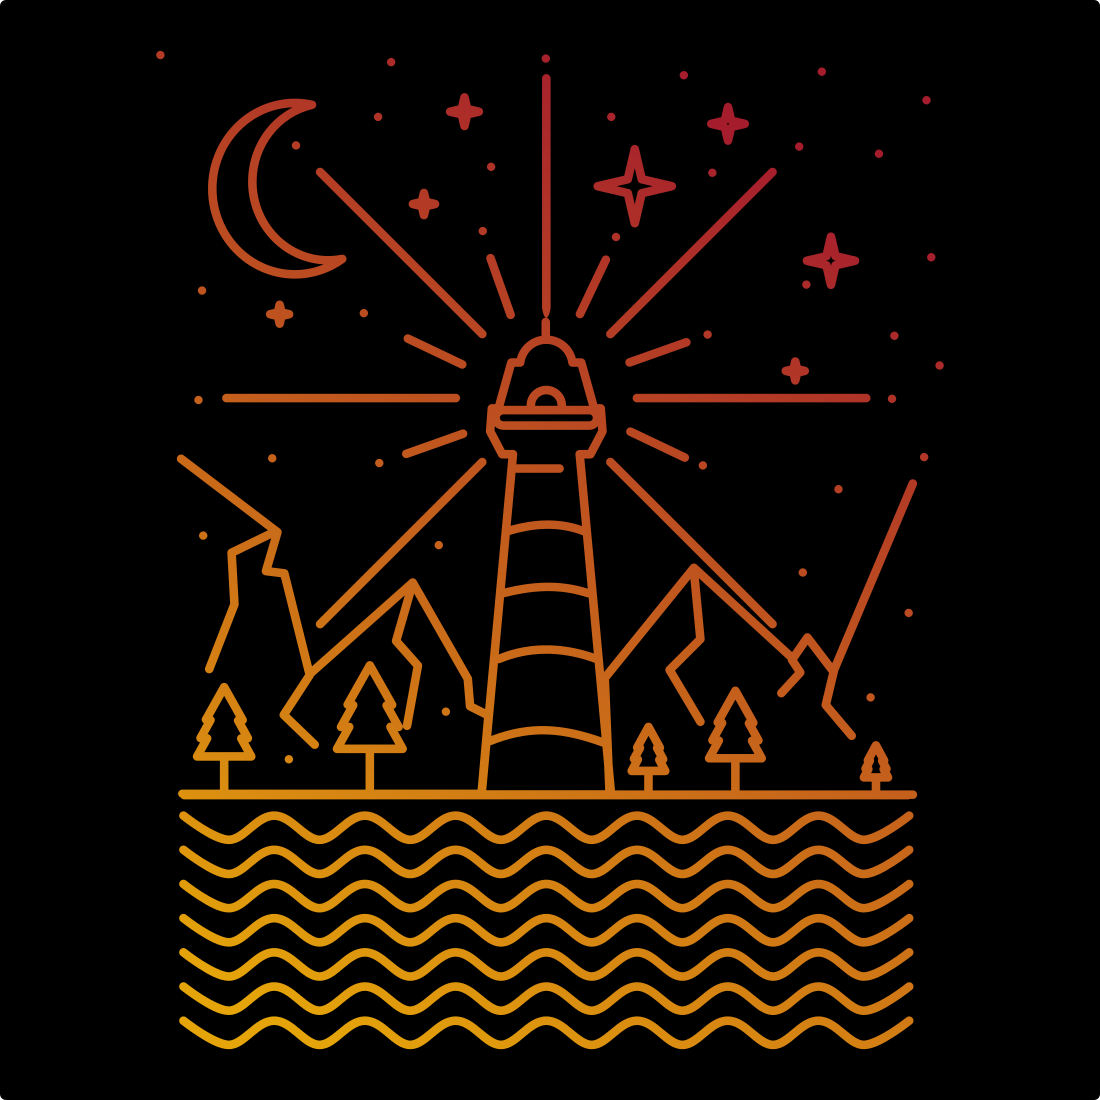 Lighthouse and Ocean T-Shirt - Simple Line Art Style Design cover image.